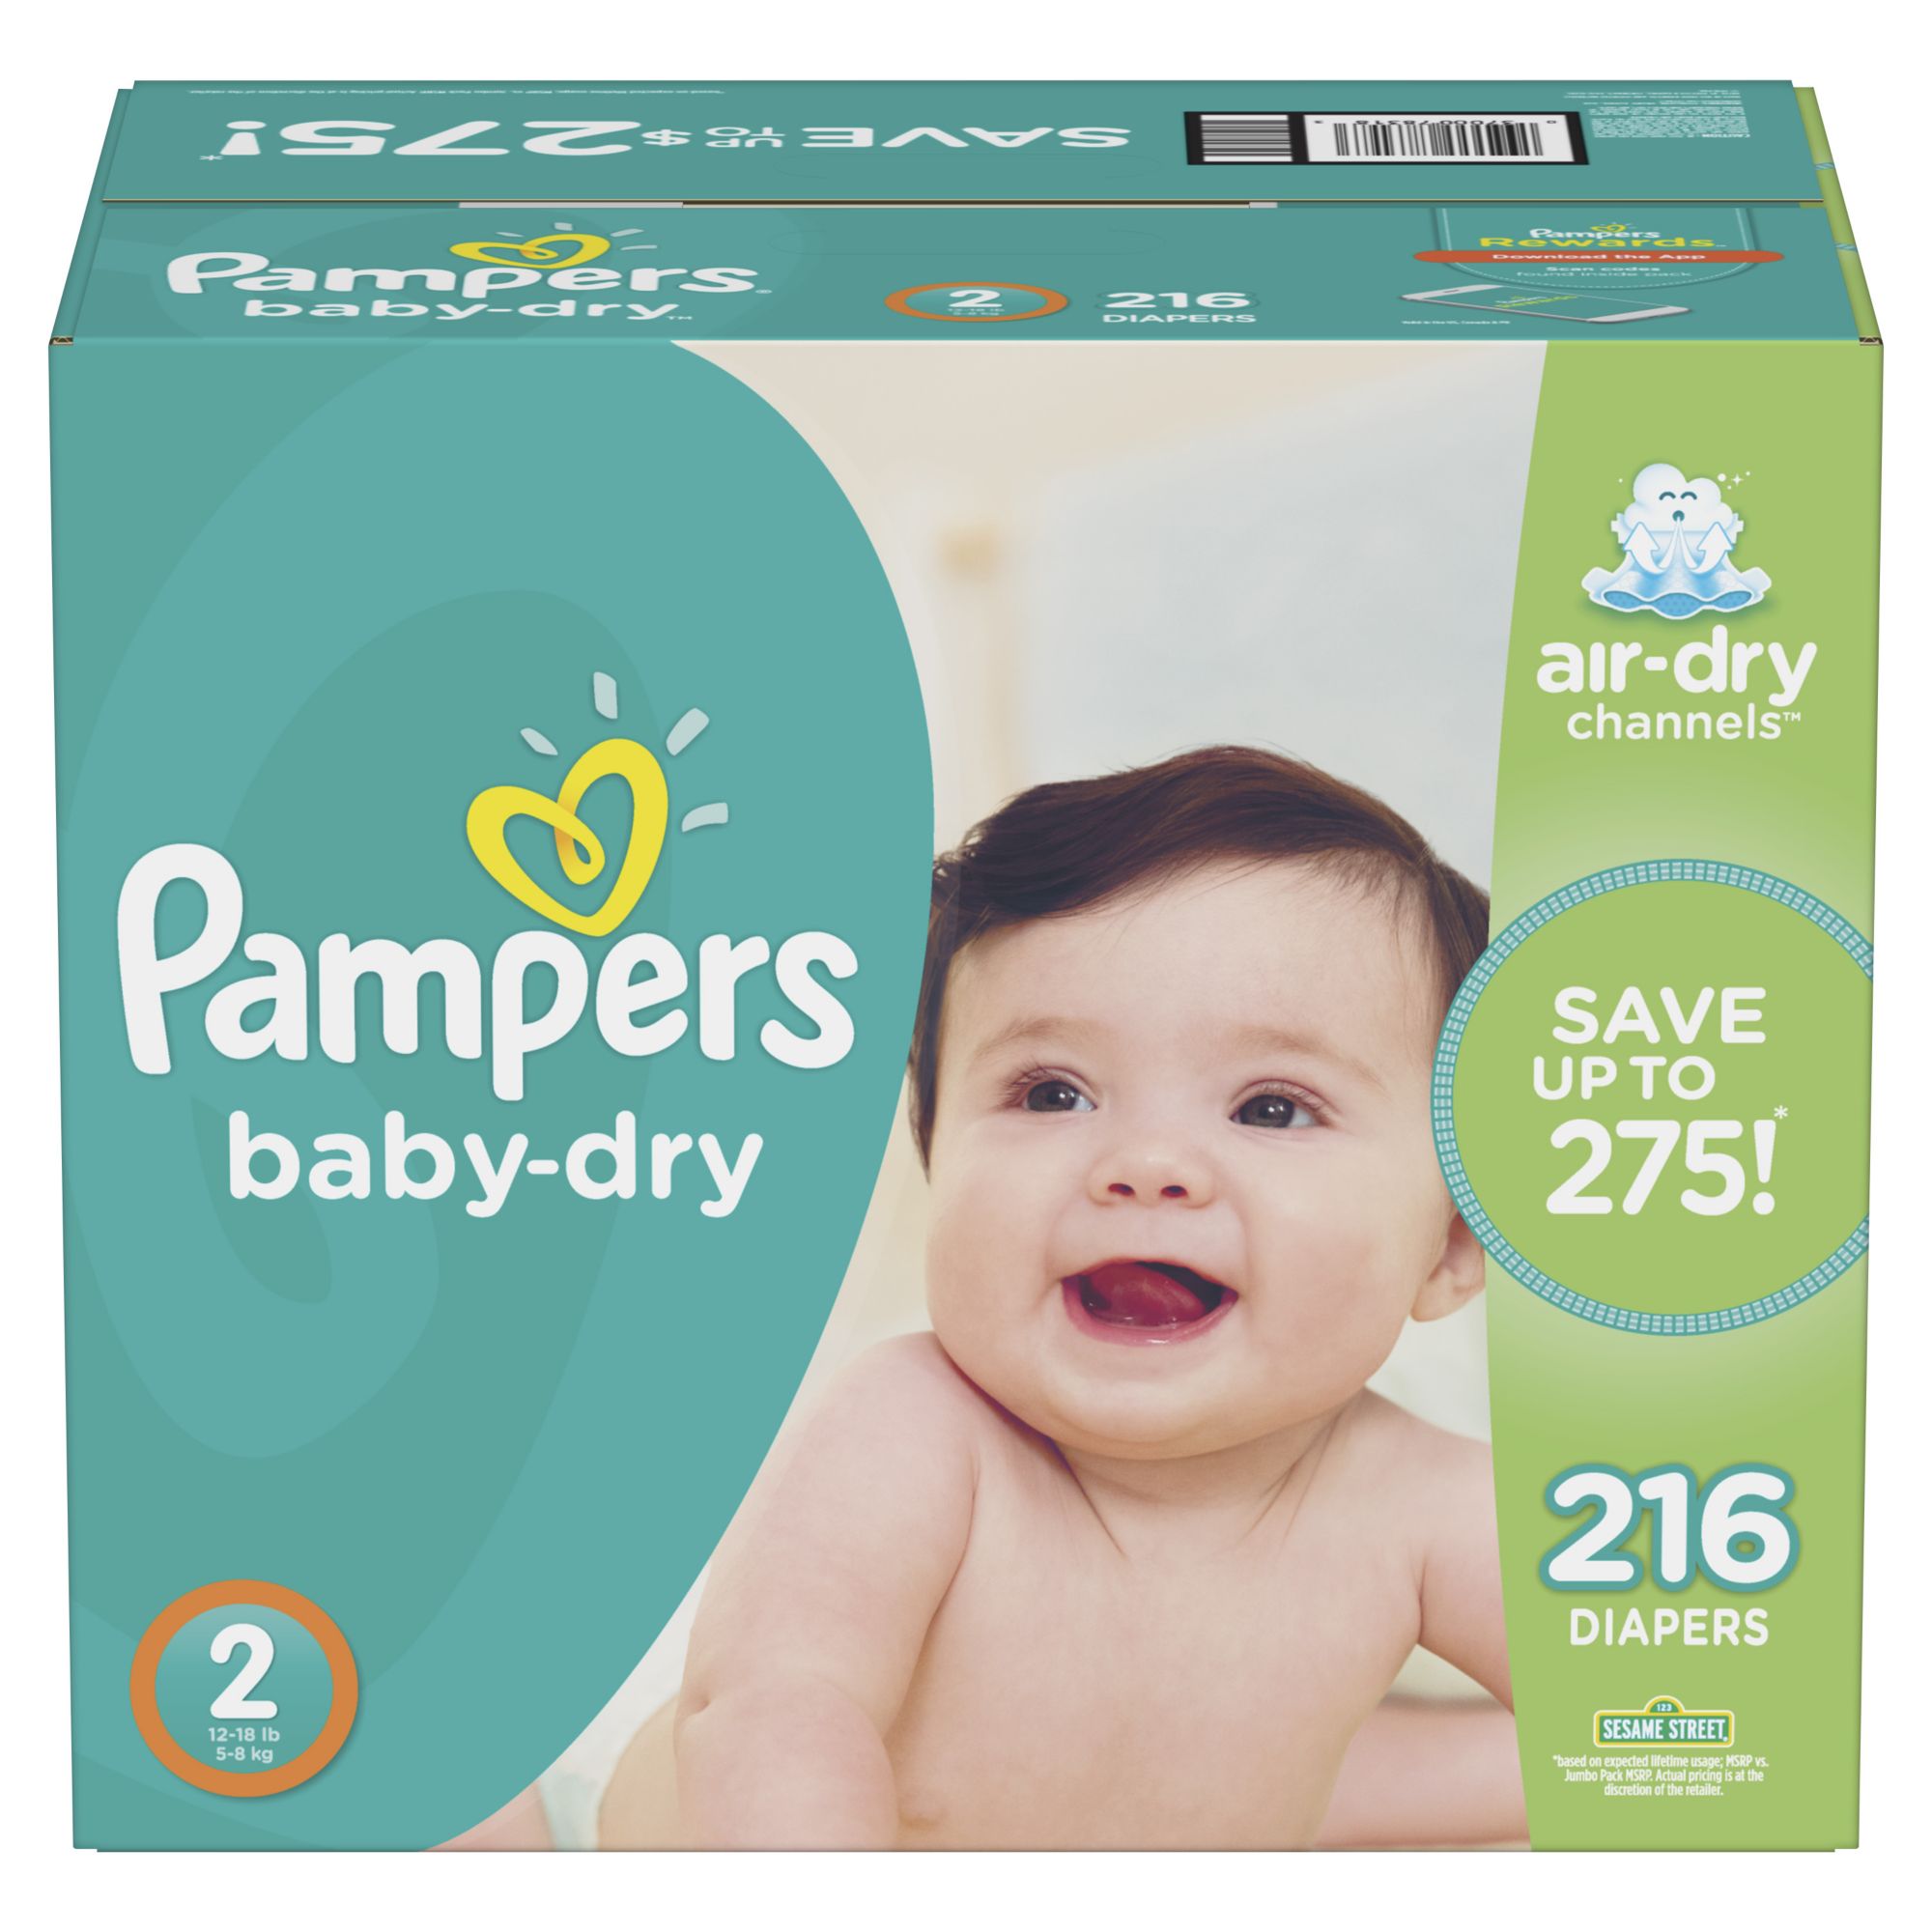 How Can My Baby Be A Pampers Model Baby Viewer